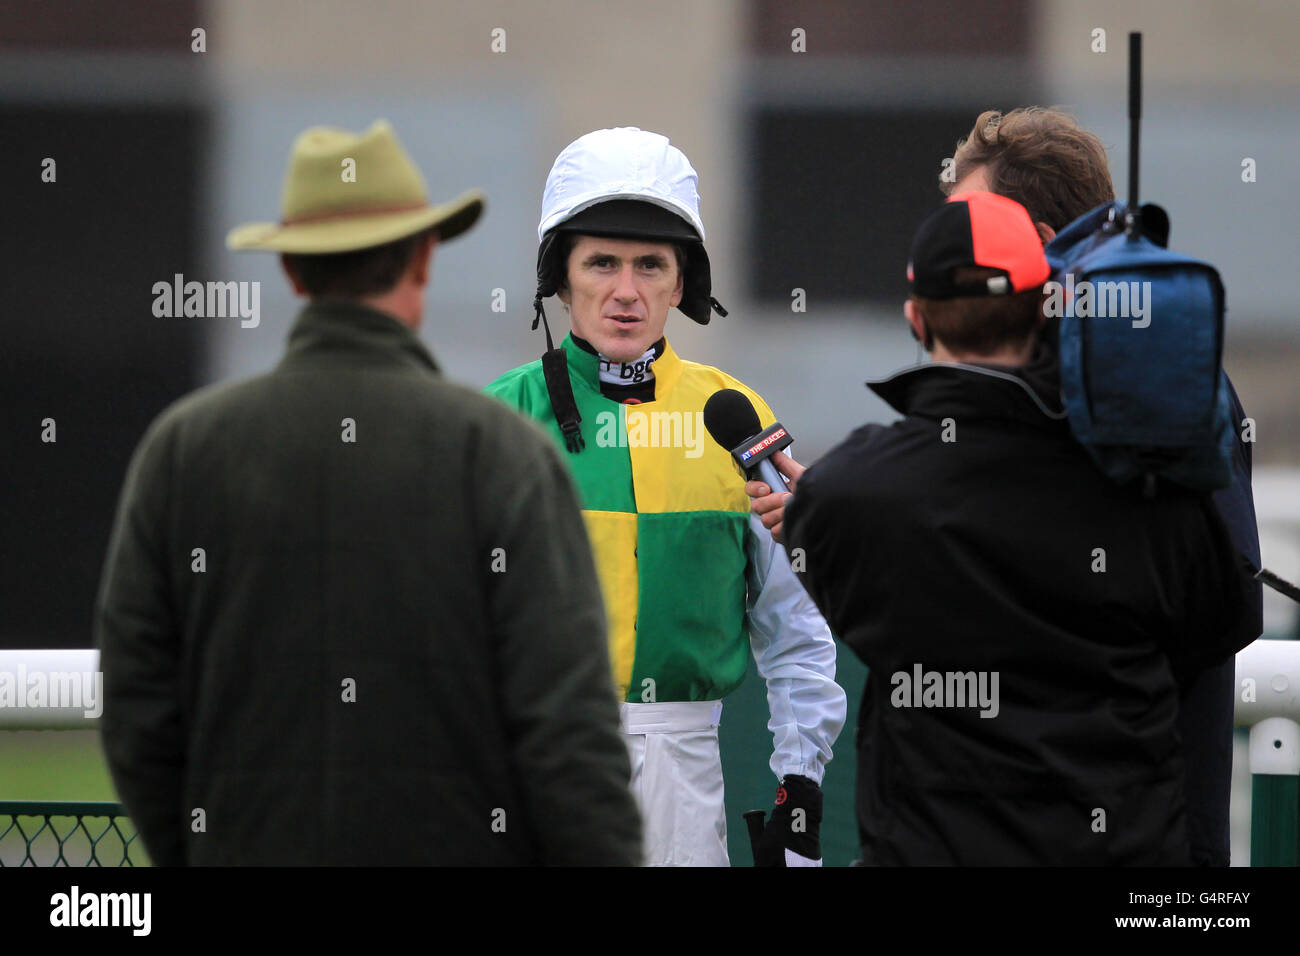 Jockey Tony McCoy is interviewed by At The Races television crew Stock Photo